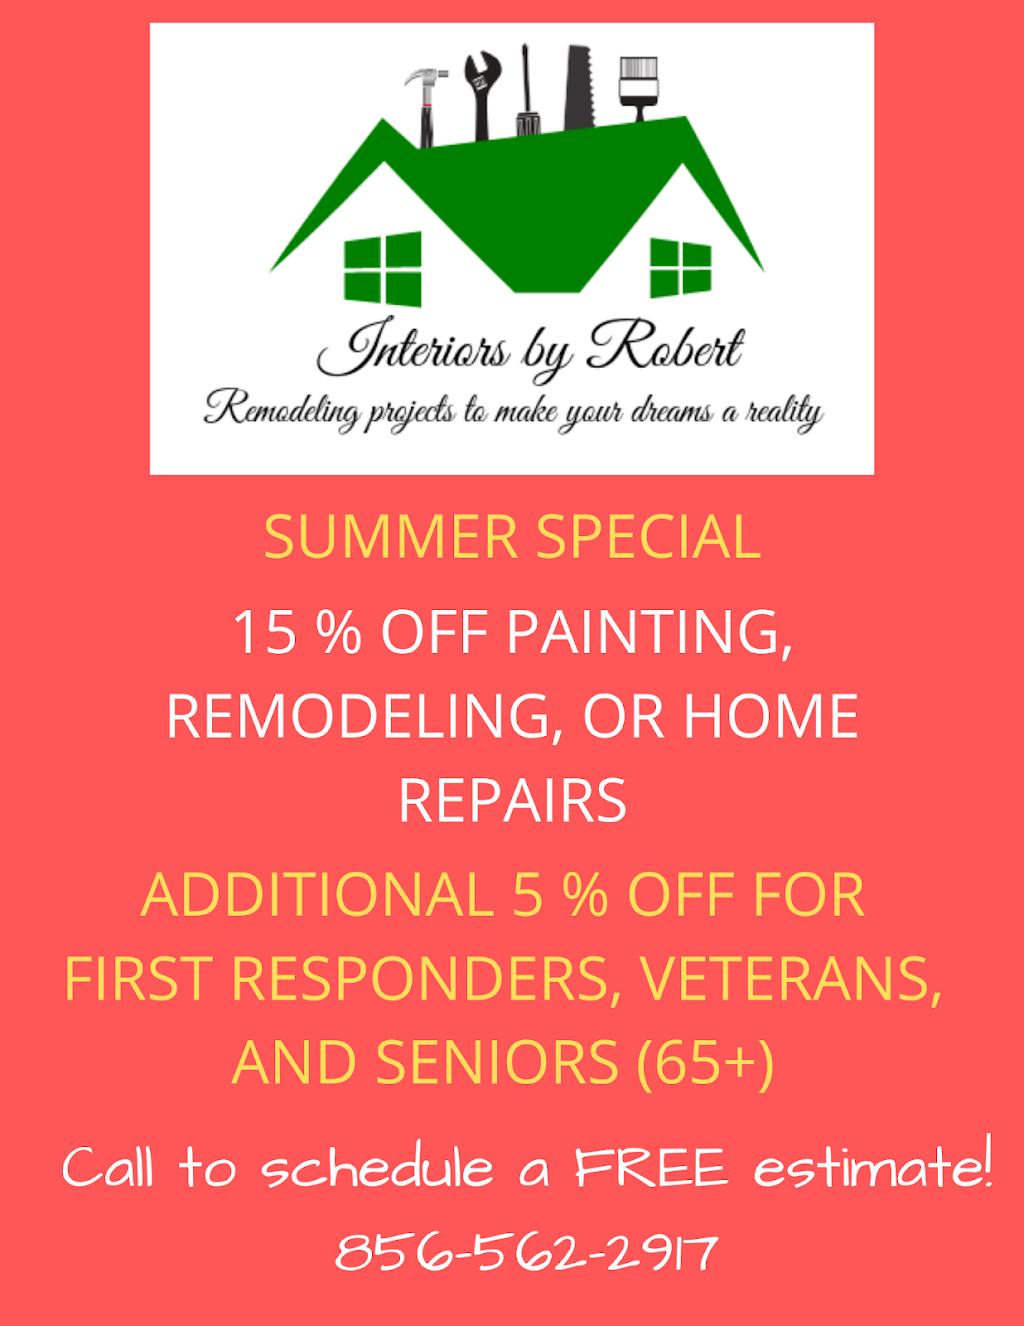 Home Repair Services by Robert | 288 Egg Harbor Road Suite #9 Unit 139, Sewell, NJ 08080 | Phone: (856) 562-2917